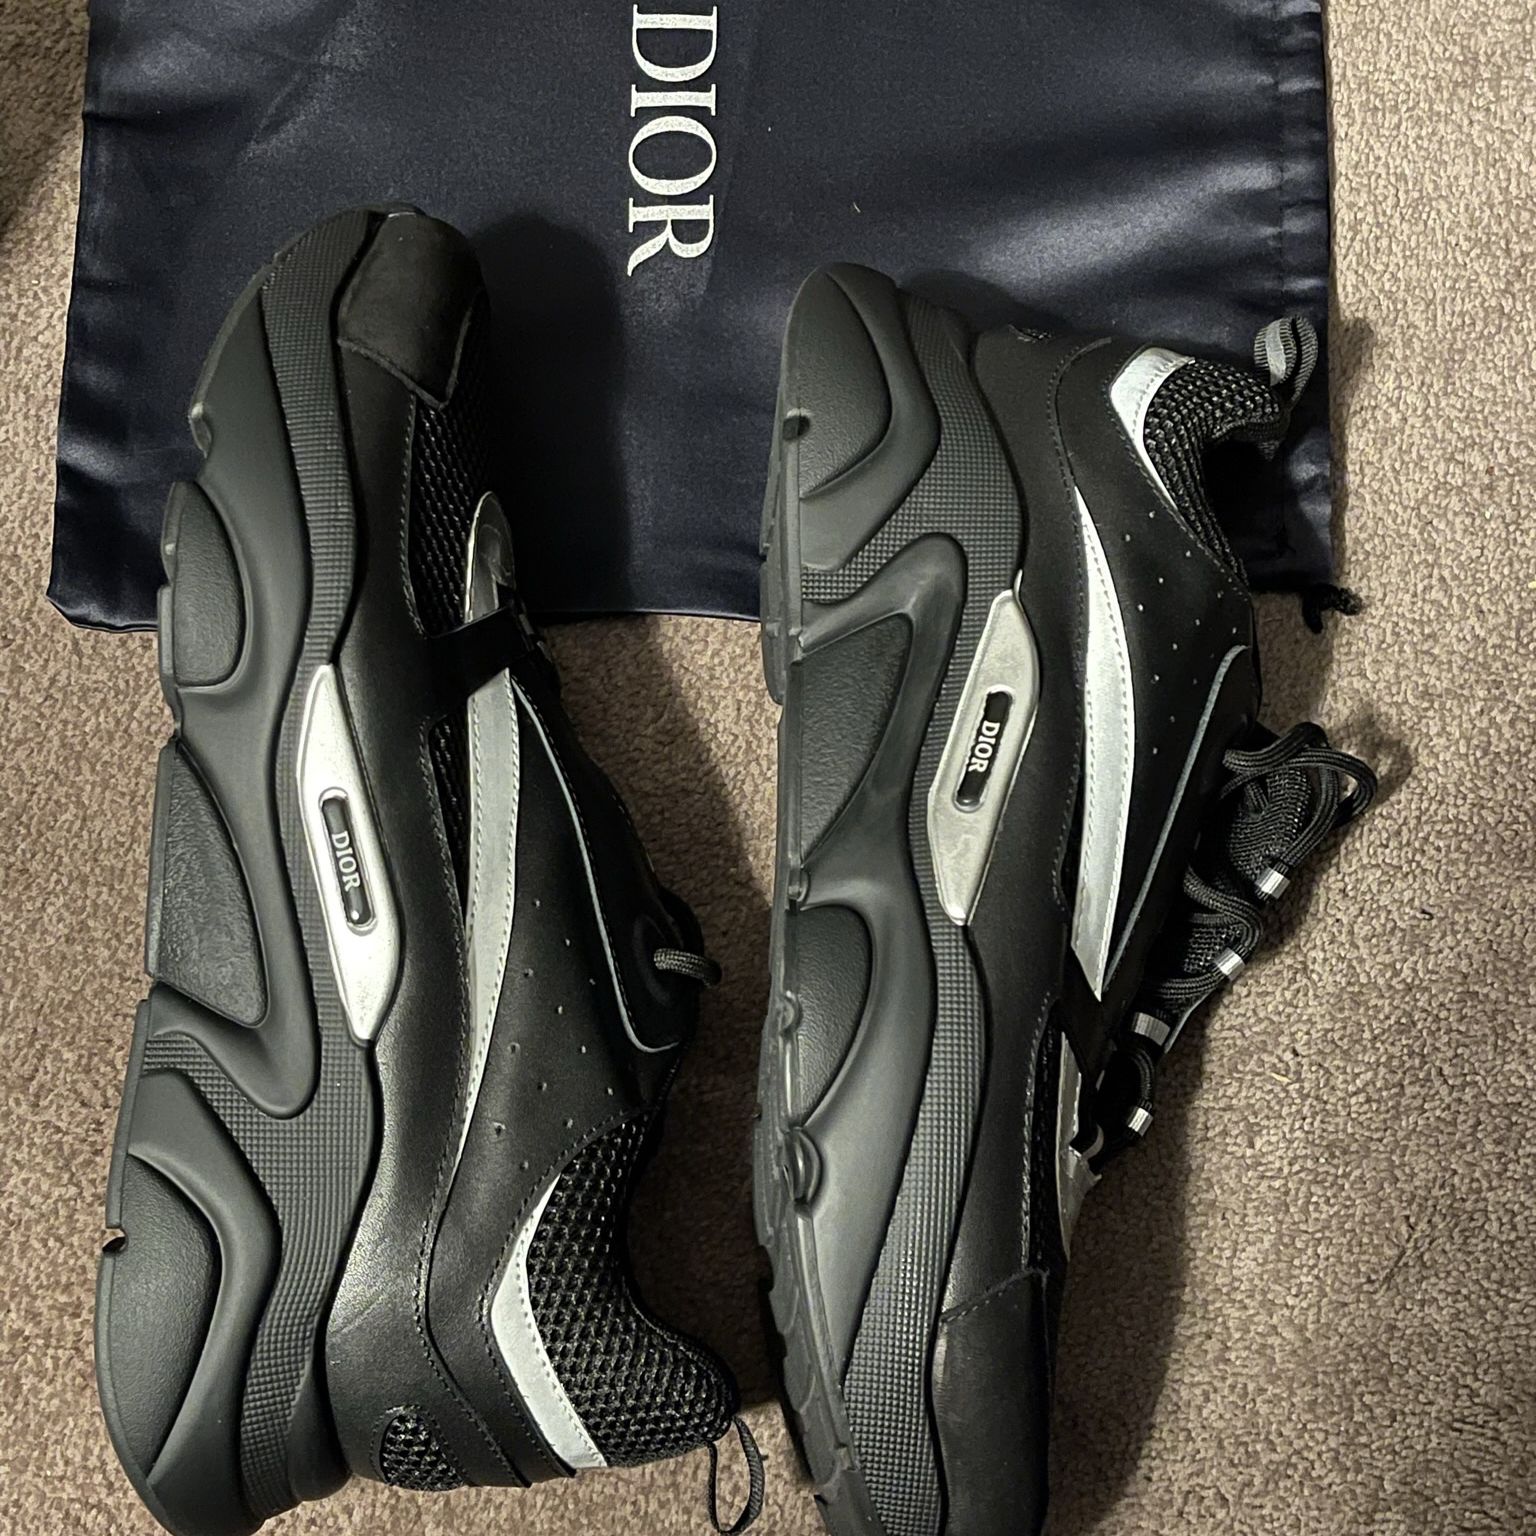 Dior B22 Size 45/12 USA Used for Sale in Peck Slip, NY - OfferUp